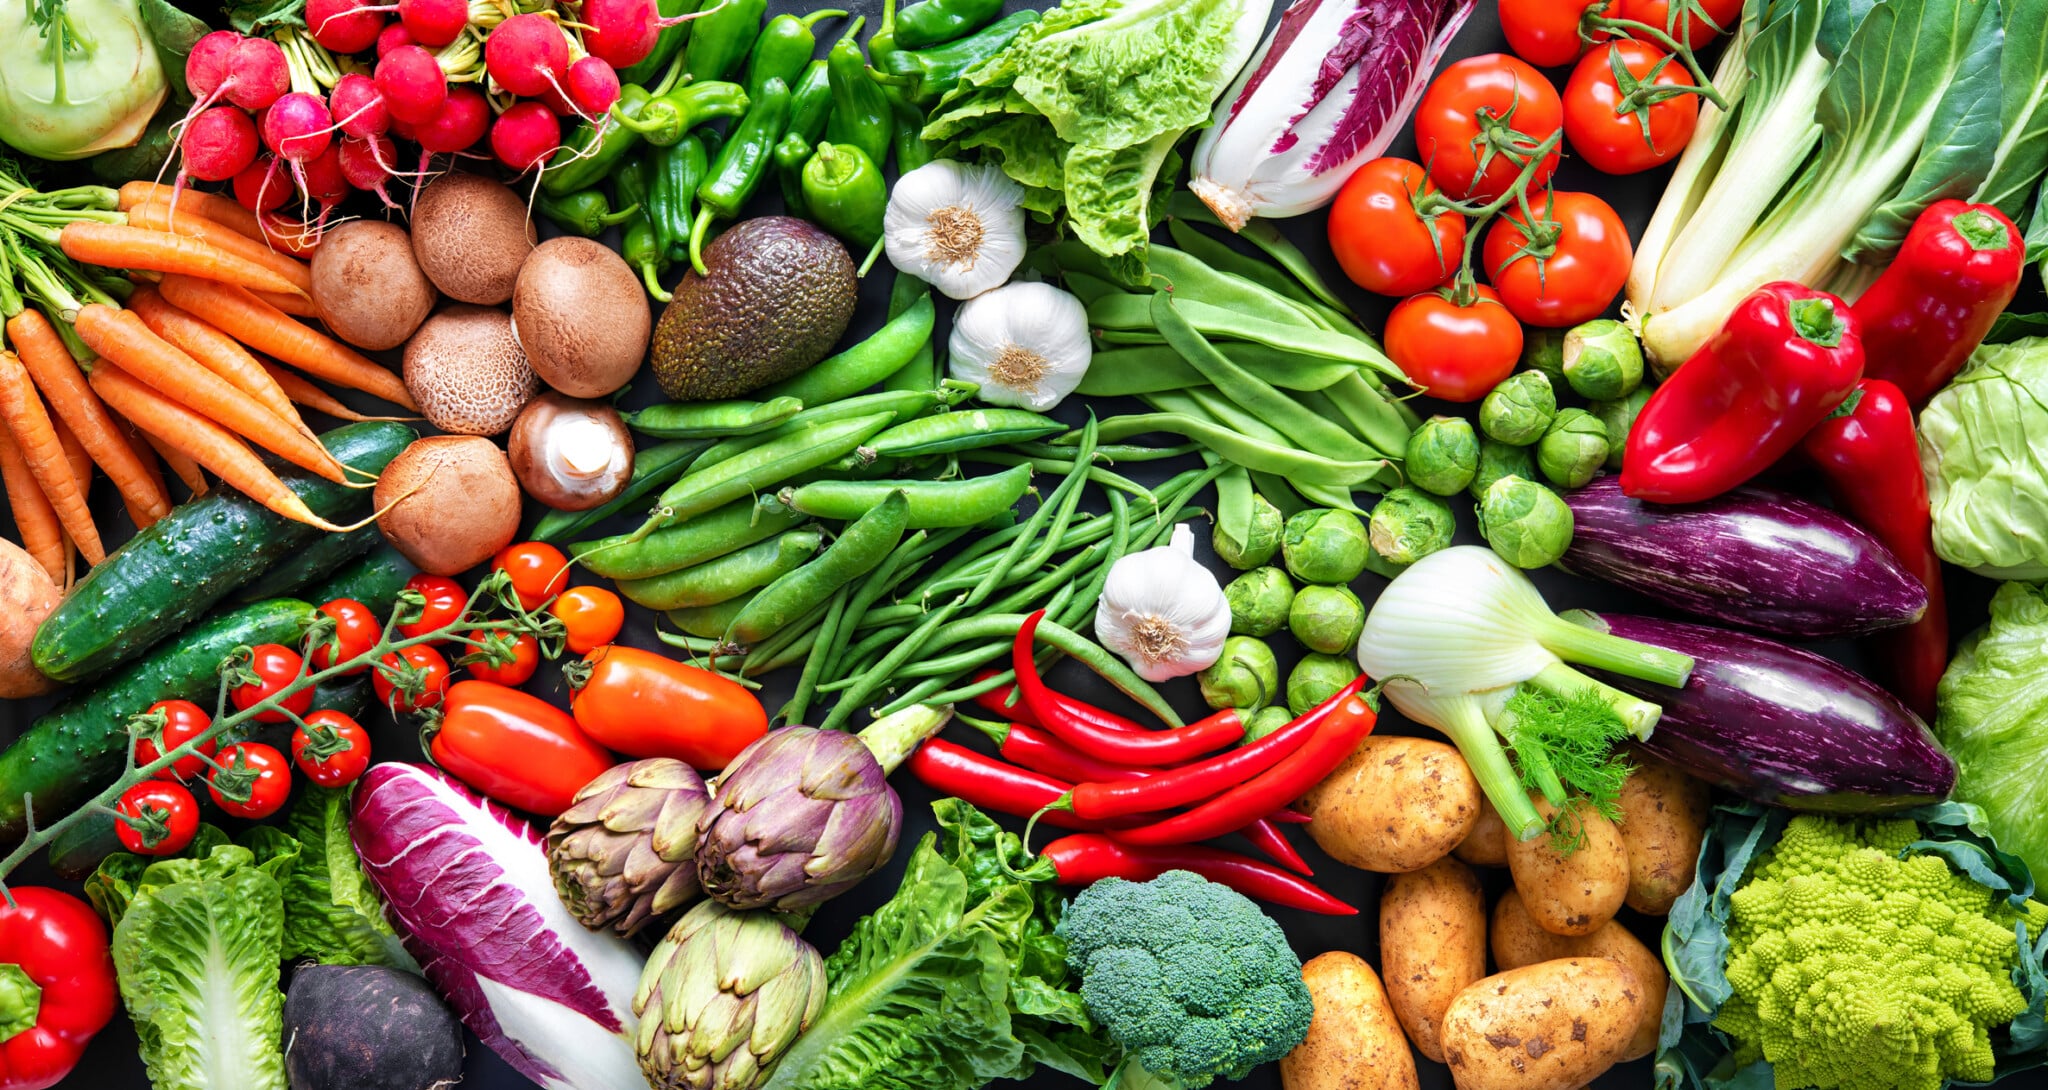 Different types of colorful organic vegetables laid out in a panoramic view.